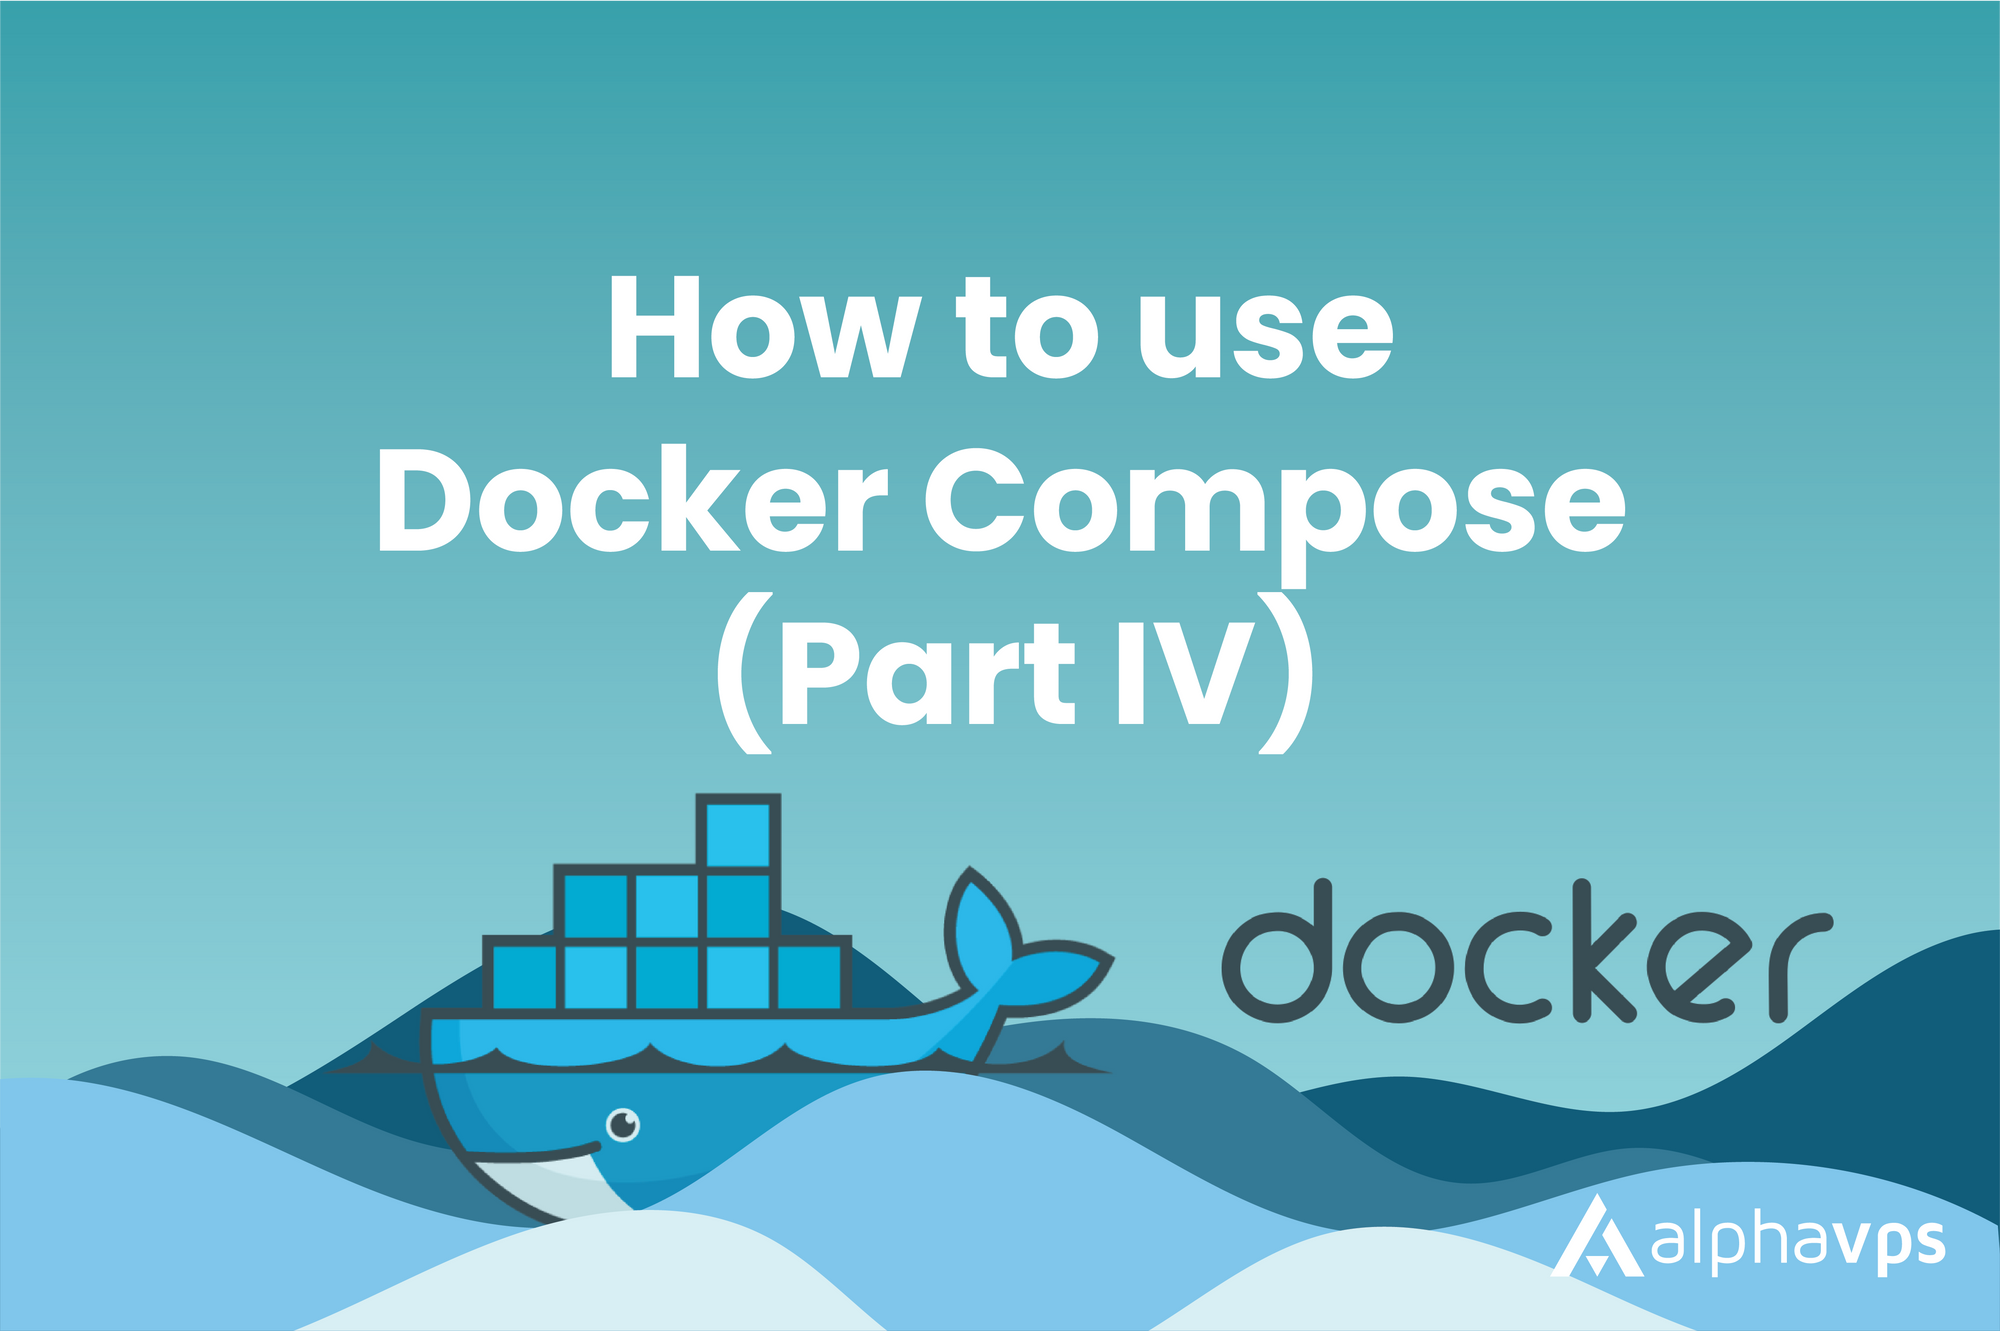 How to Use Docker Compose